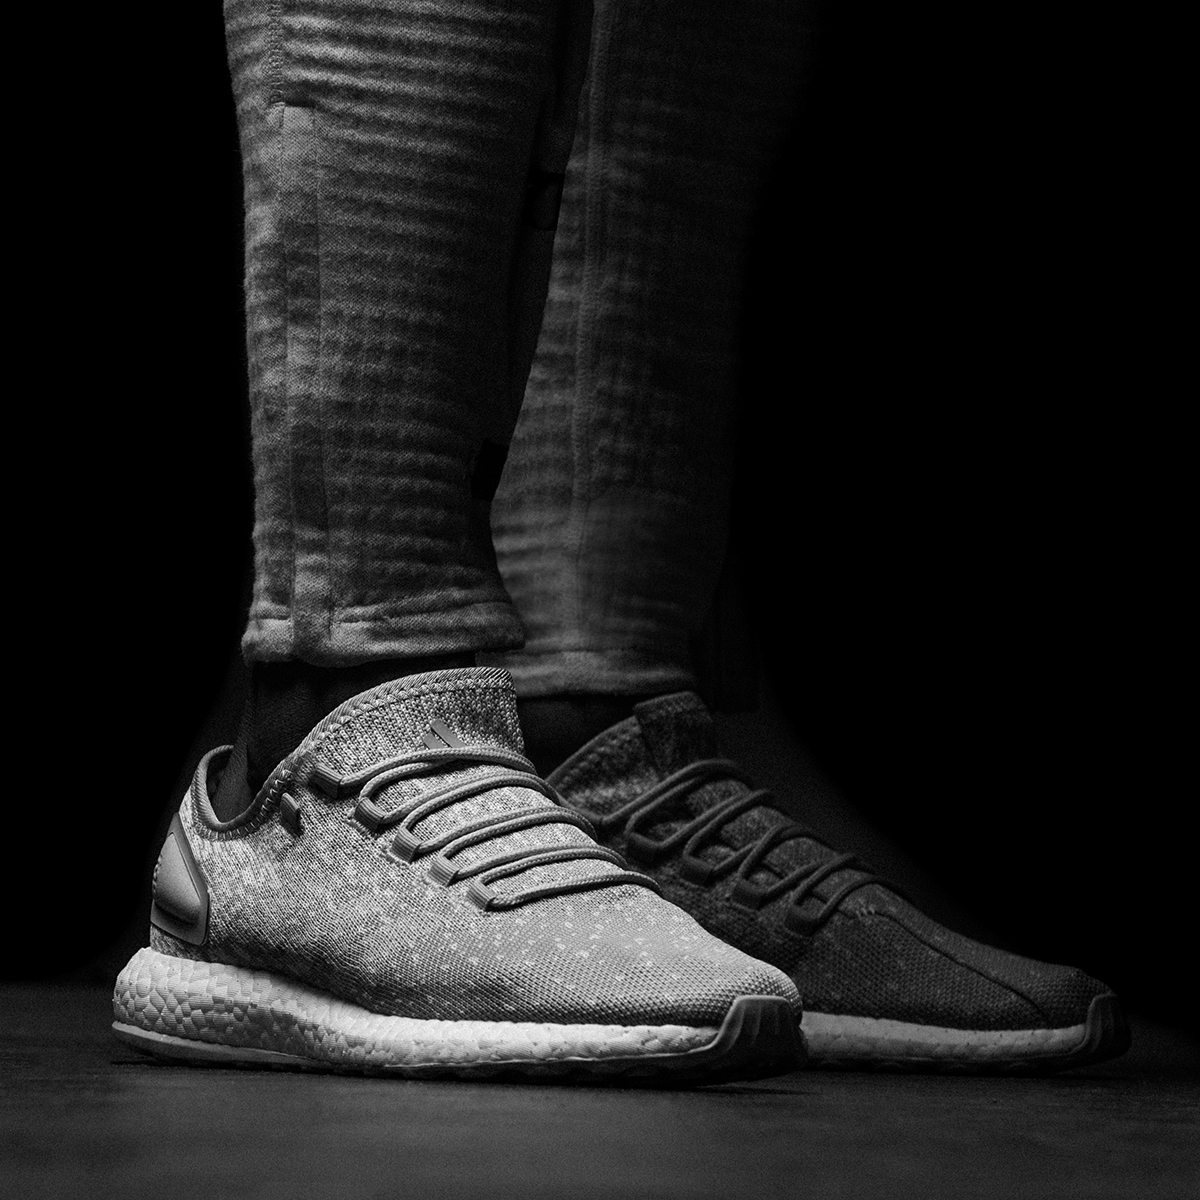 Reigning Champ and adidas Unveil New AlphaBOUNCE and PureBOOST ...